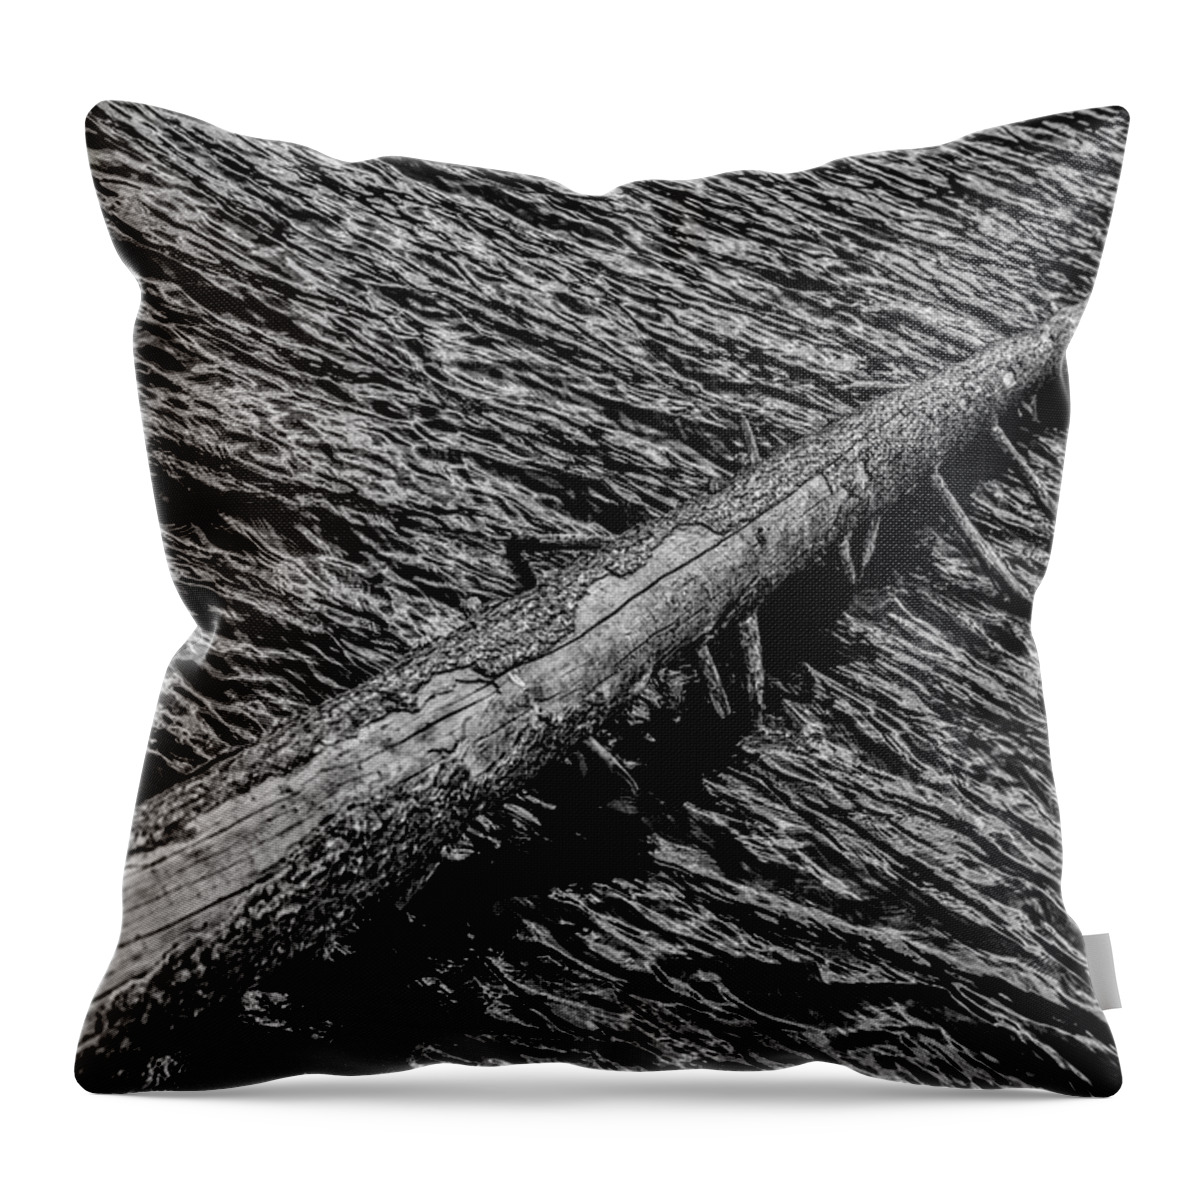 Black And White Throw Pillow featuring the photograph No Splash Down by Michael Brungardt